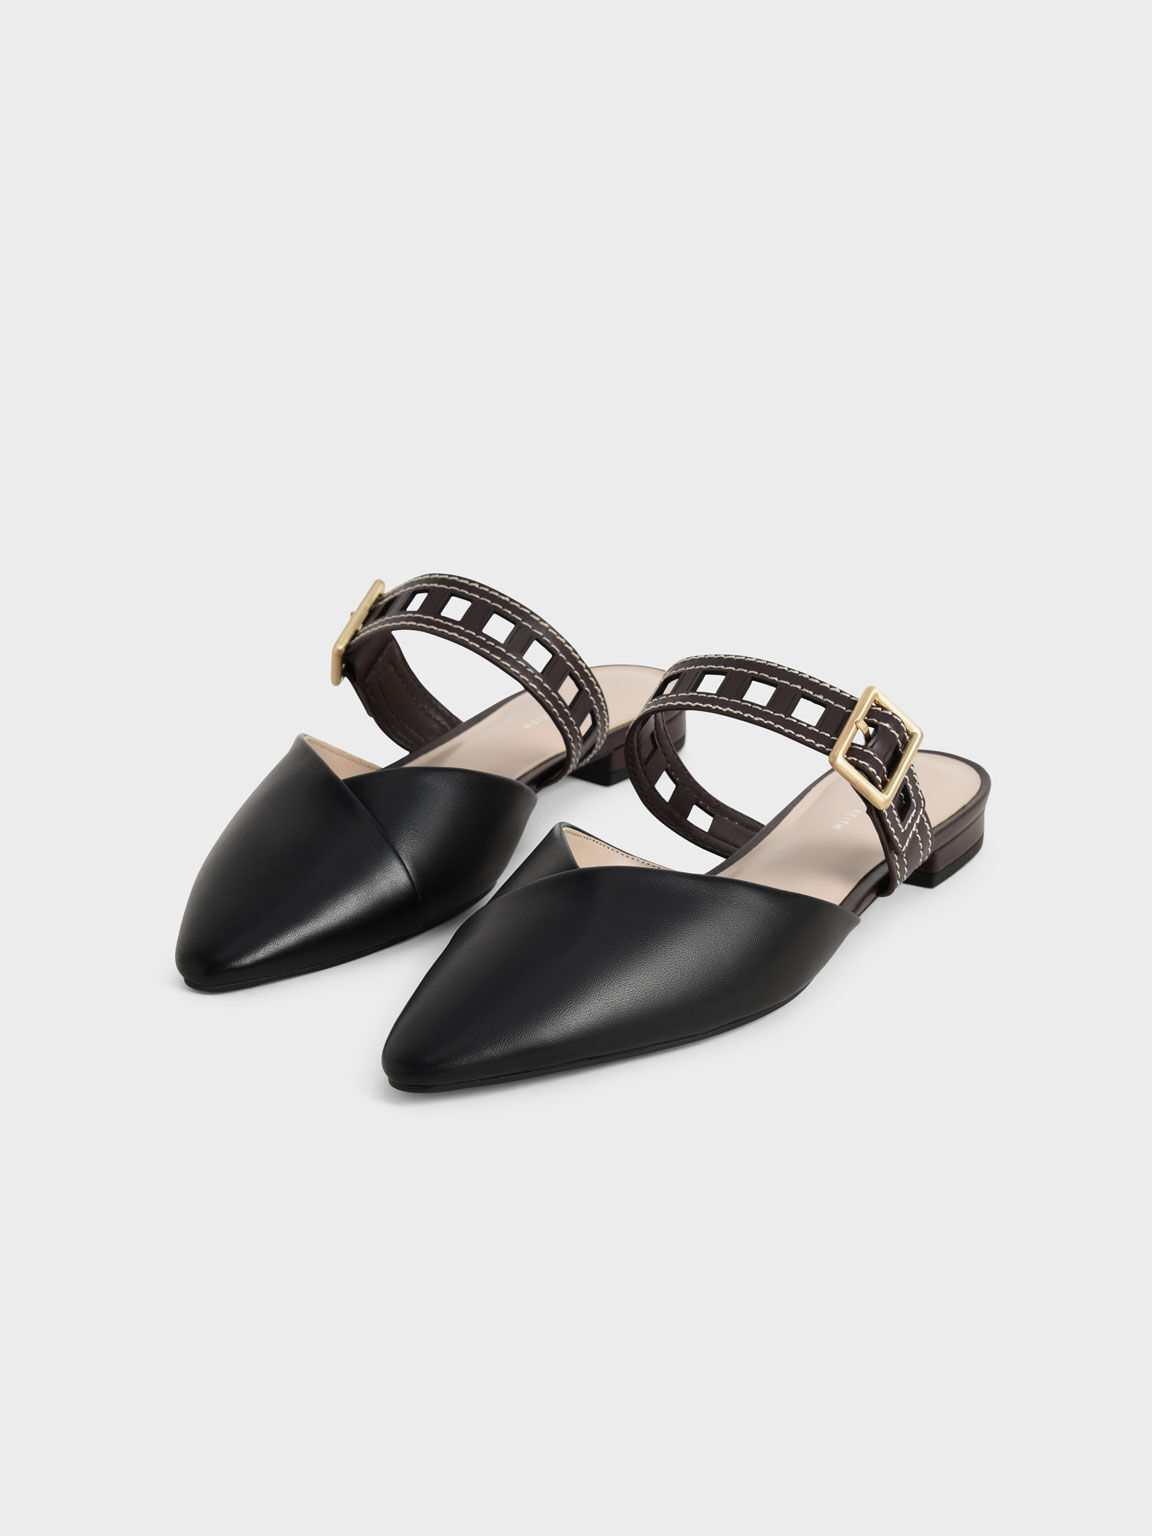 Black Cut-Out Strap Flat Mule Pumps - CHARLES & KEITH SG